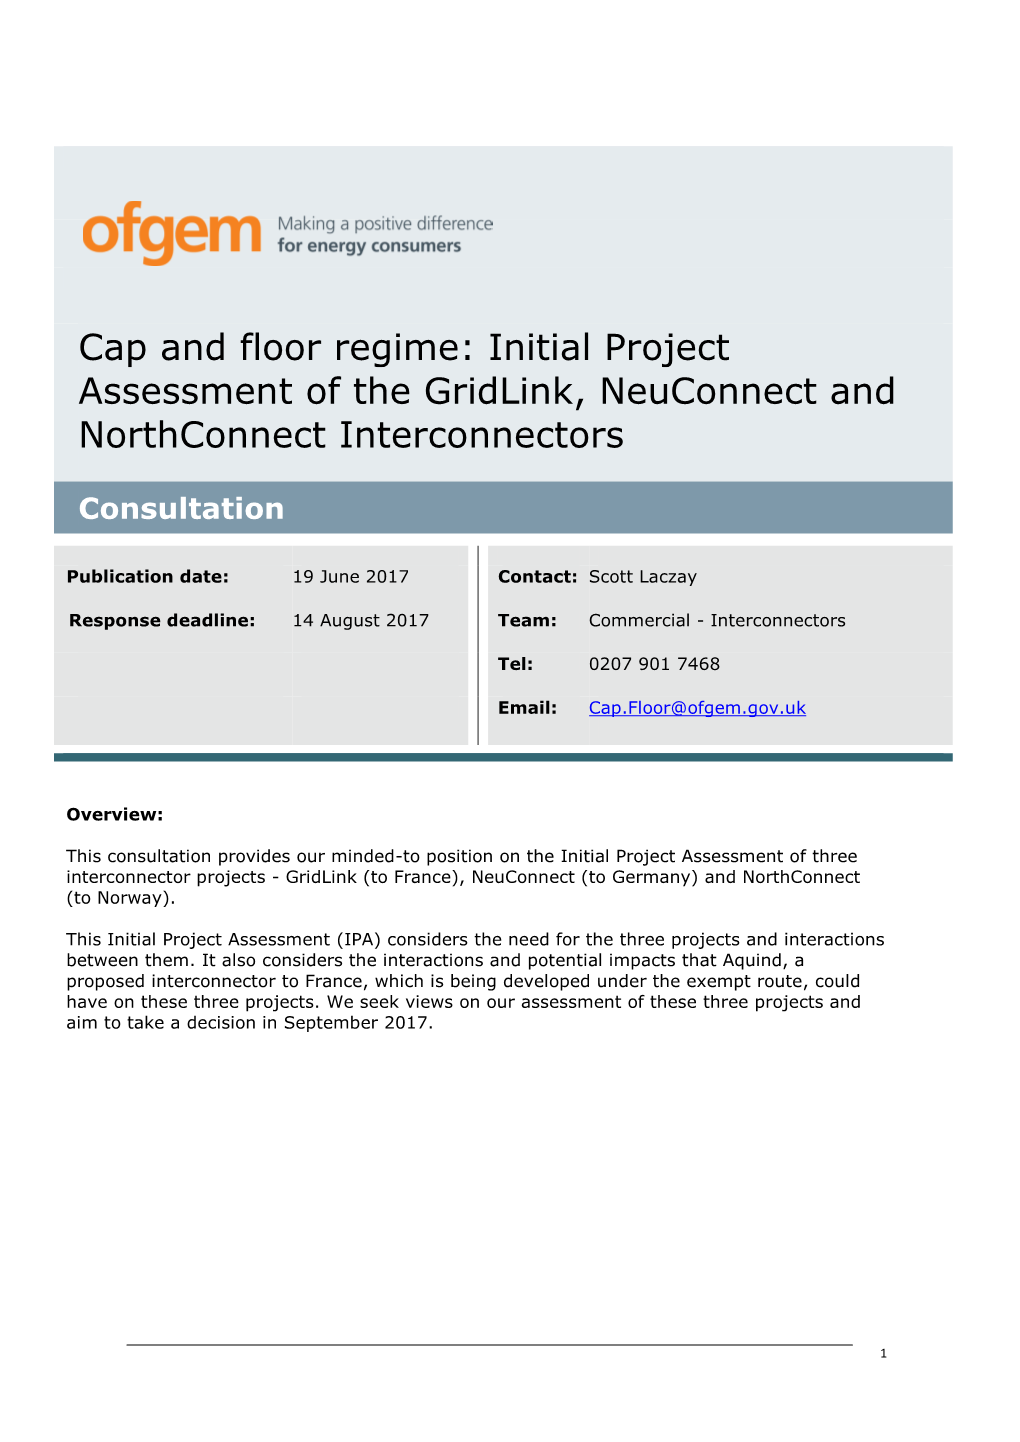 Cap and Floor Regime: Initial Project Assessment of the Gridlink, Neuconnect and Northconnect Interconnectors